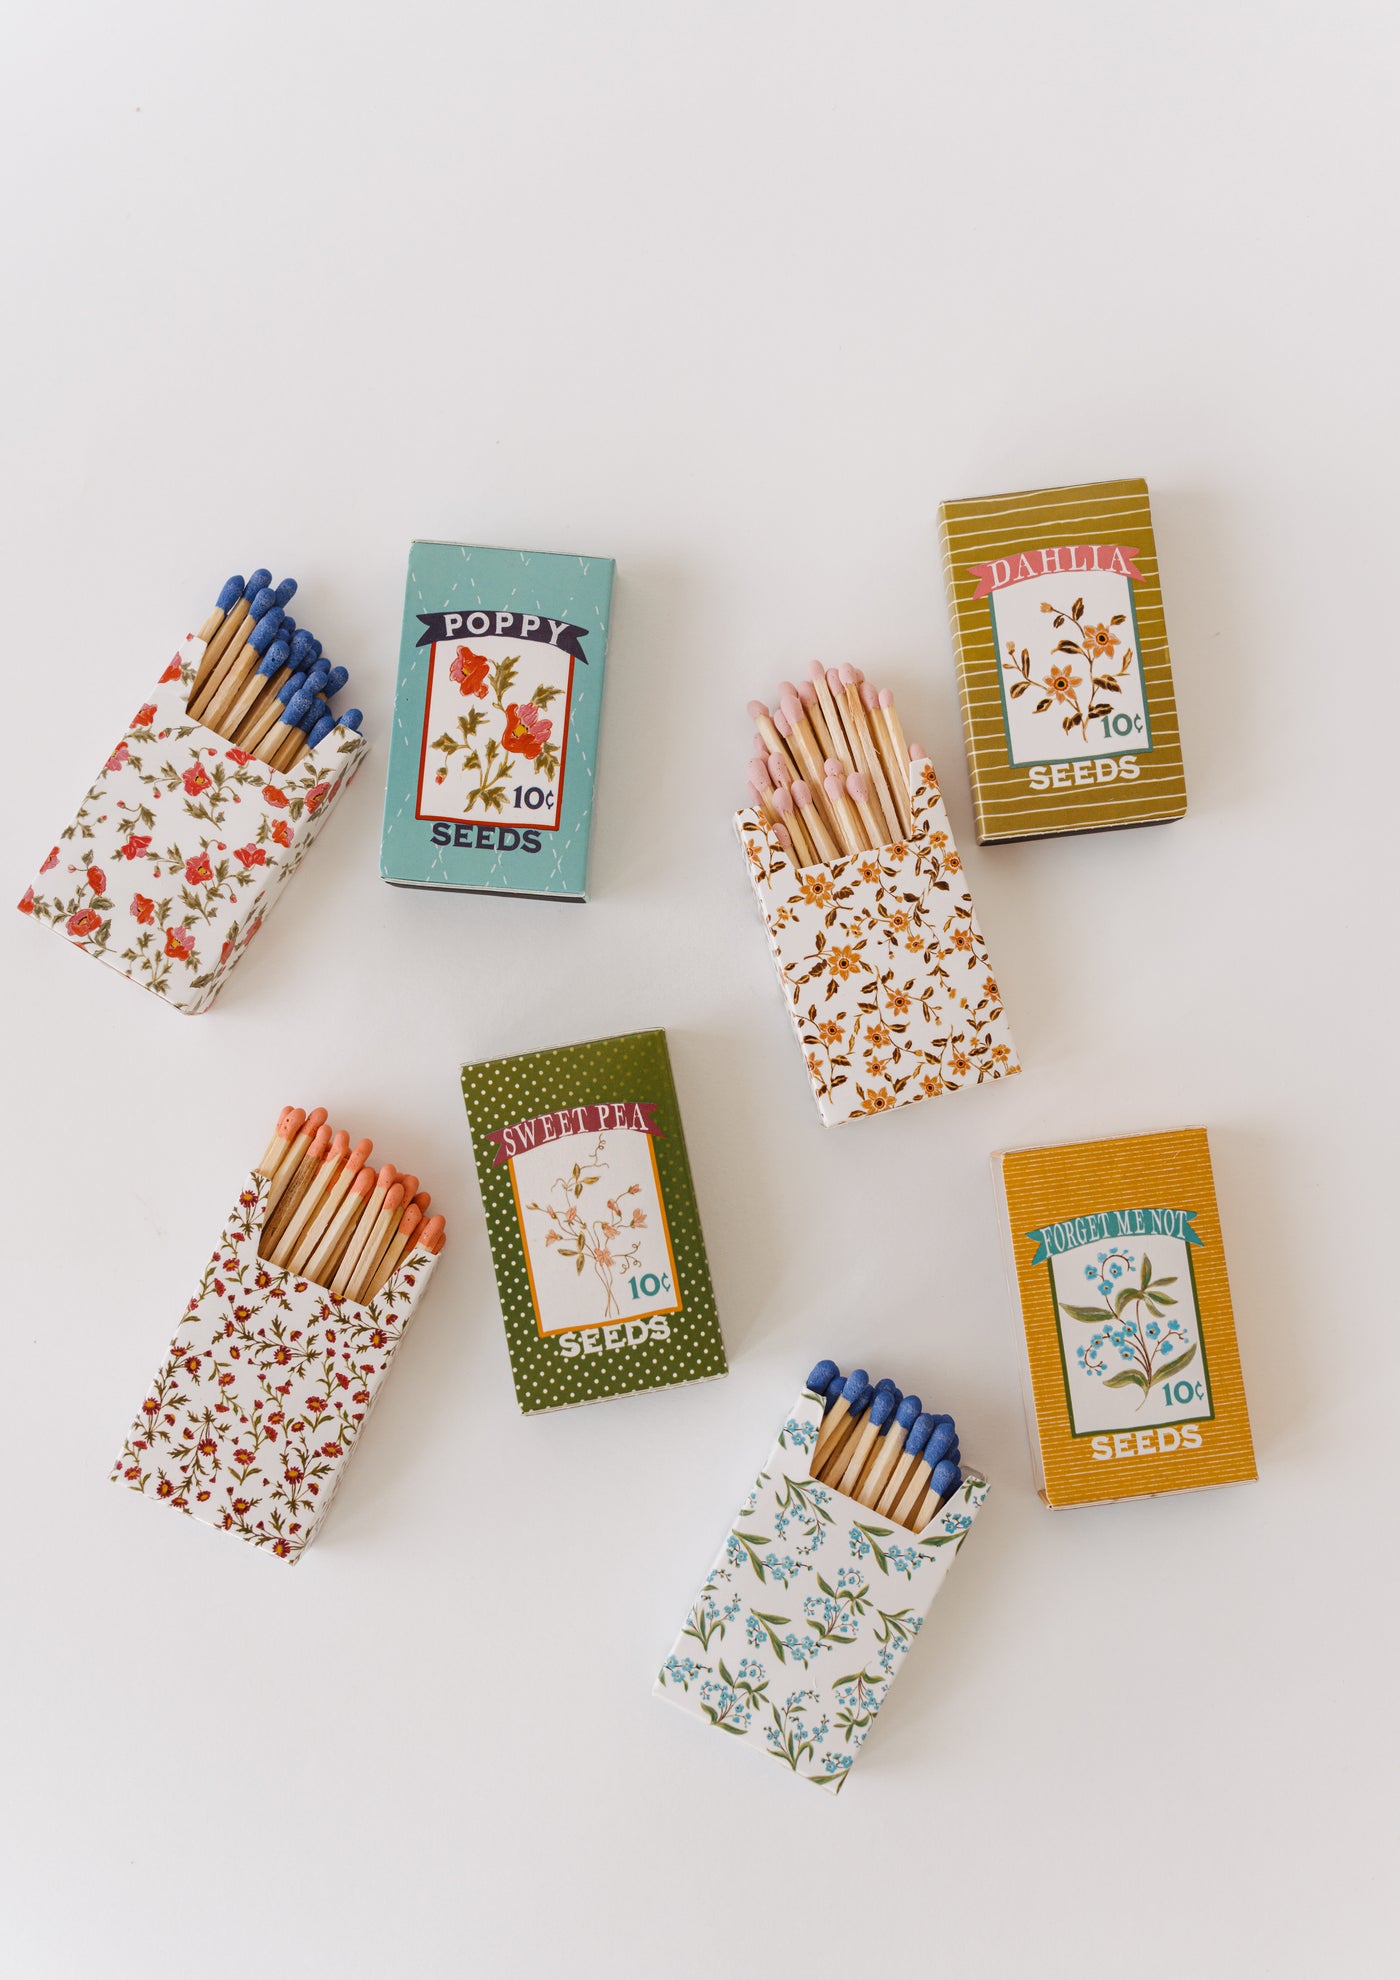 Matches in "Flower Seed" Match Boxes